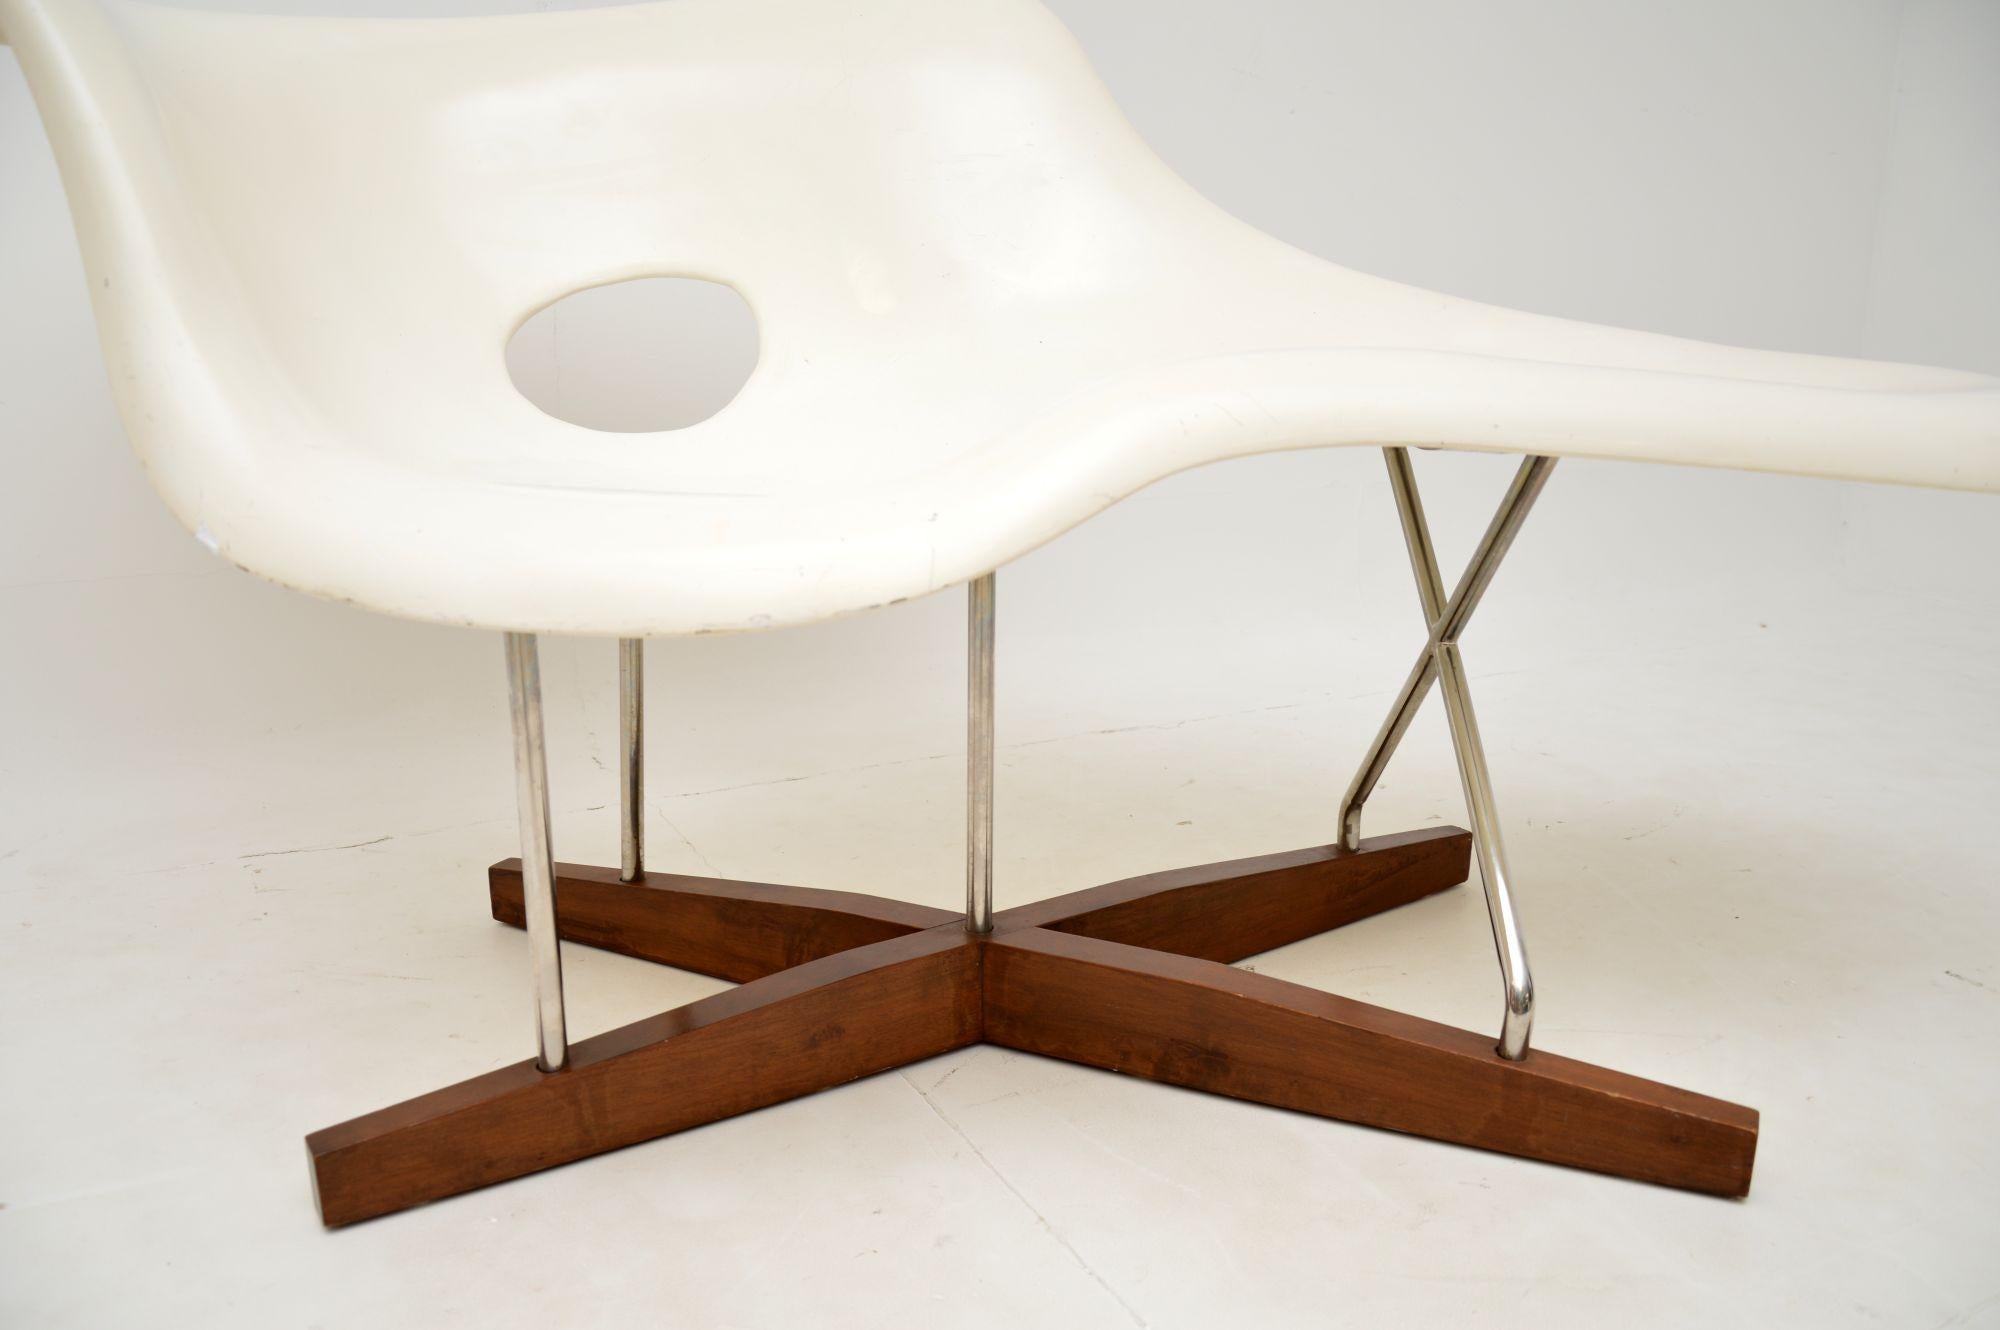 Vintage Charles Eames La Chaise Longue For Sale at 1stDibs